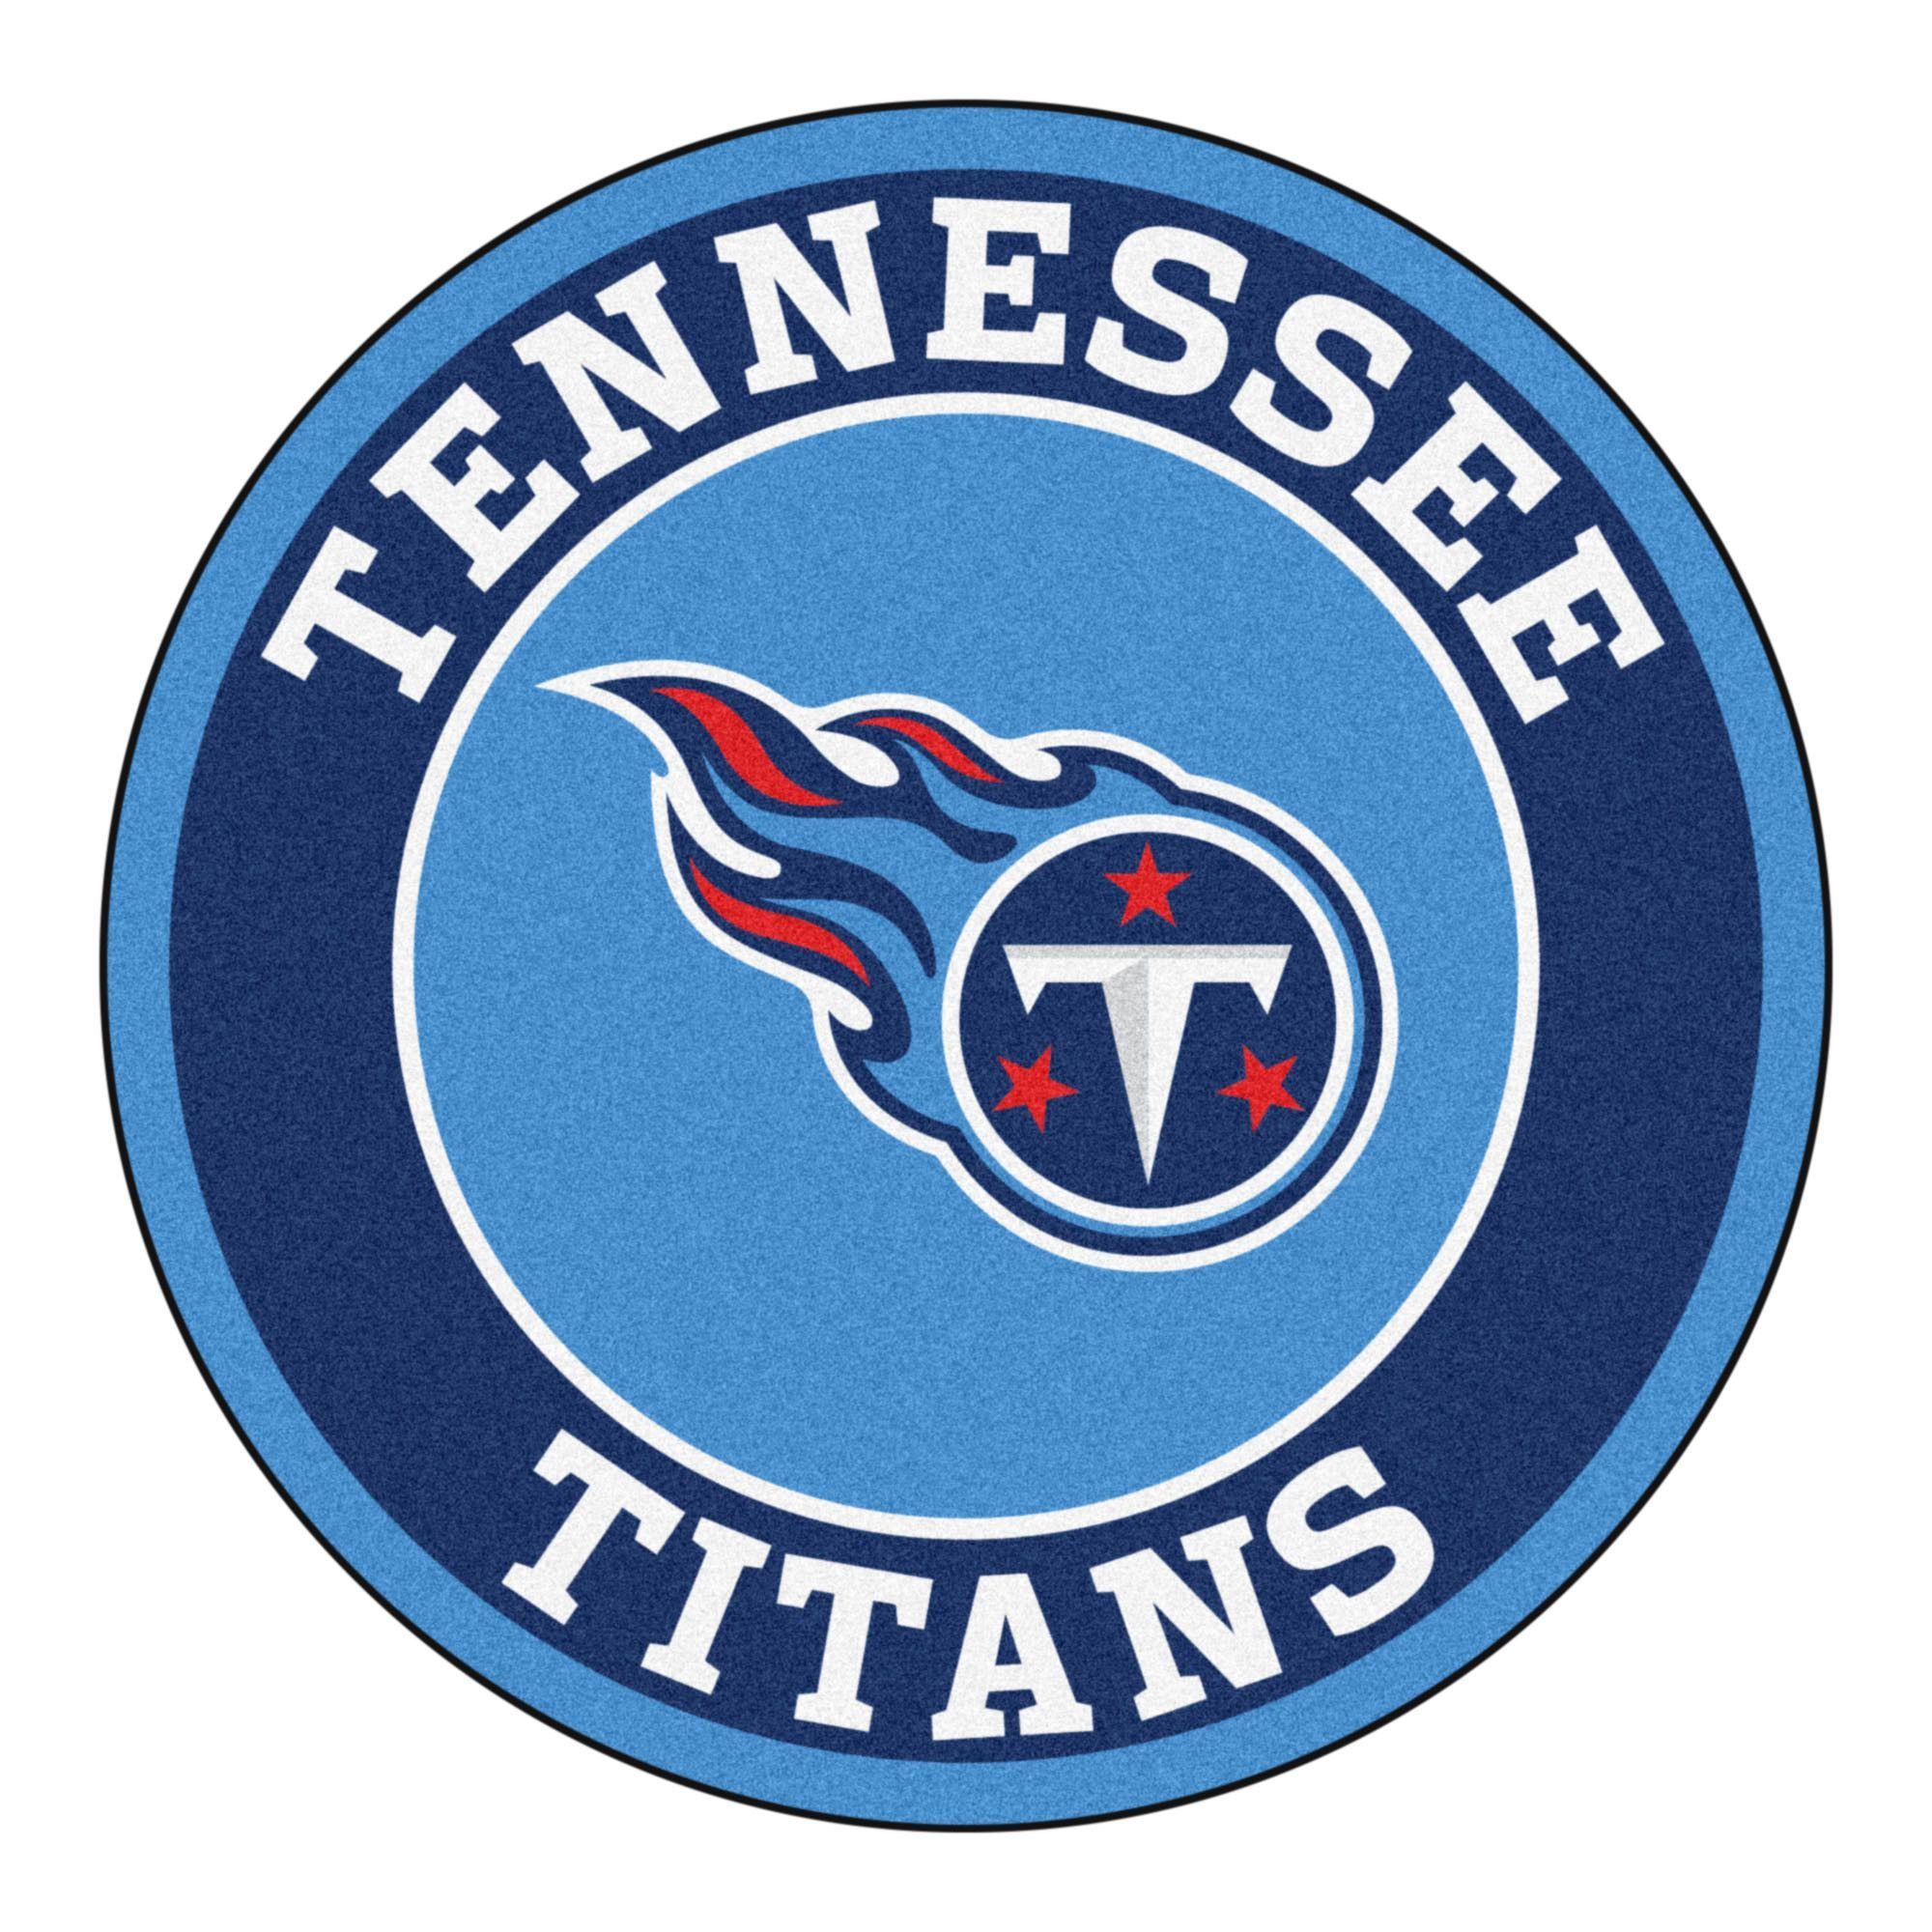 Tennessee Titans Logo - For all those NFL fans out there, these 27